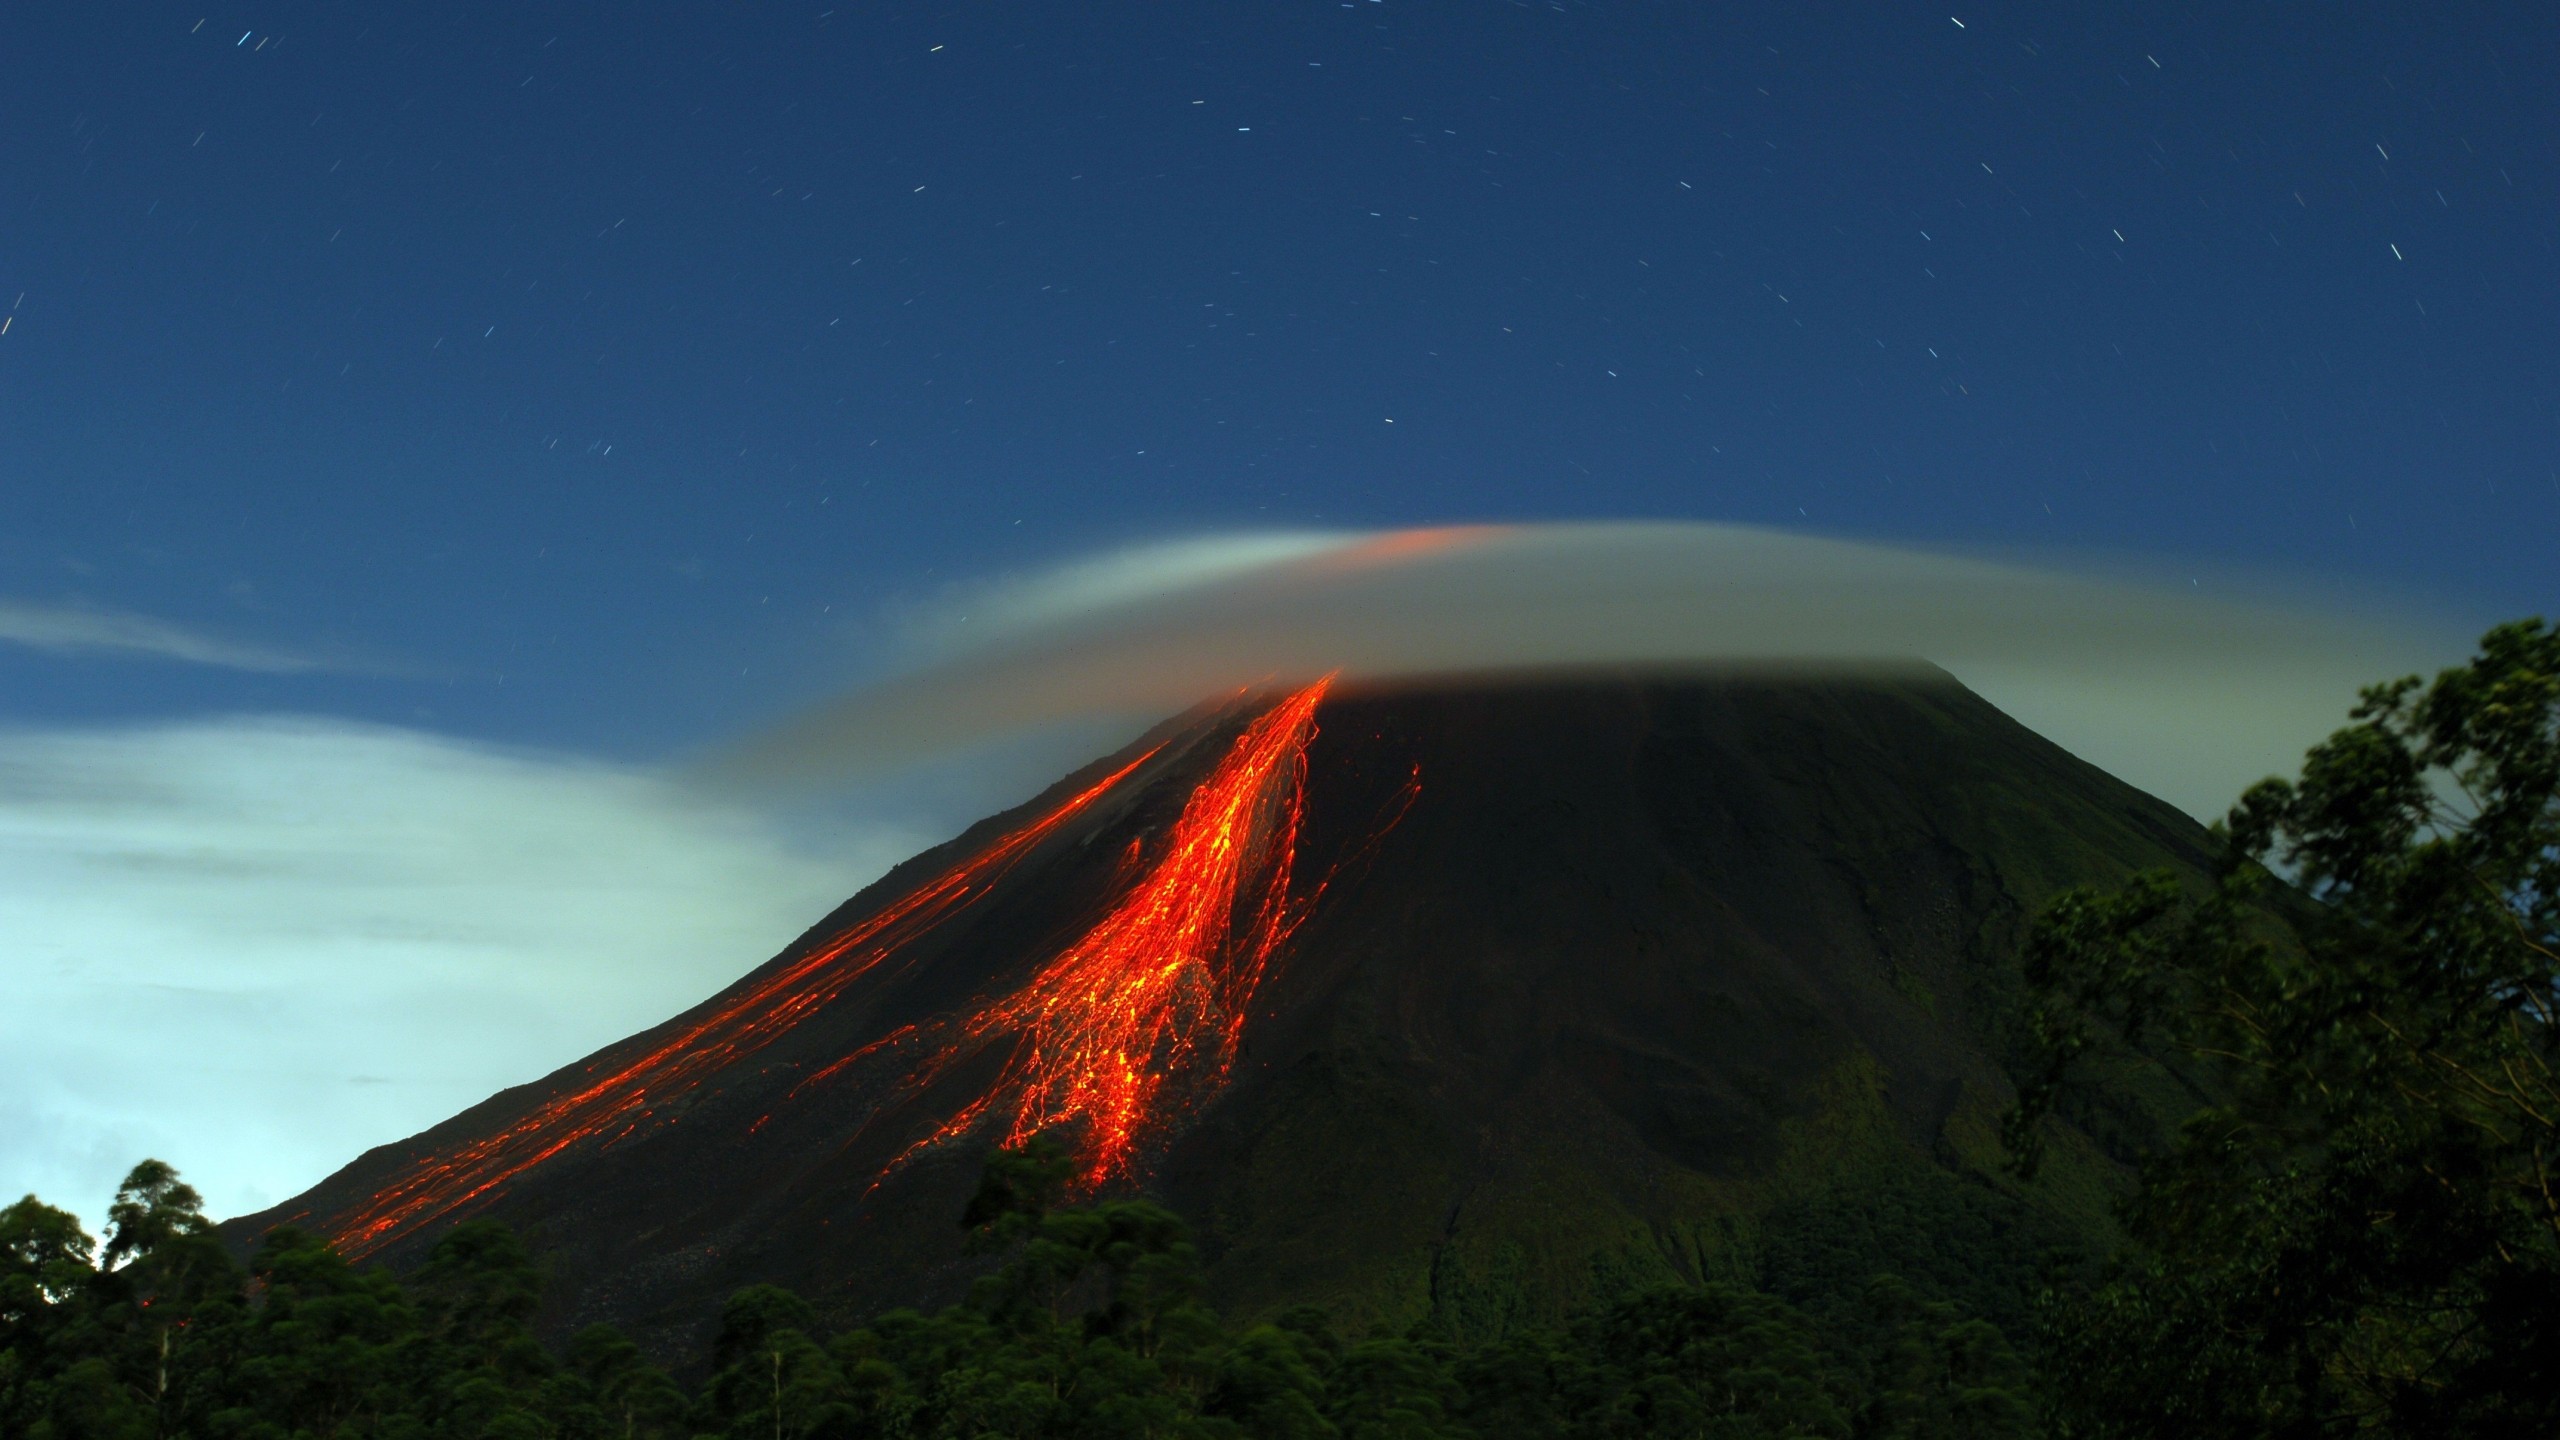 General 2560x1440 nature landscape sky clouds volcano eruption lava trees forest night stars long exposure volcanic eruption lenticular clouds